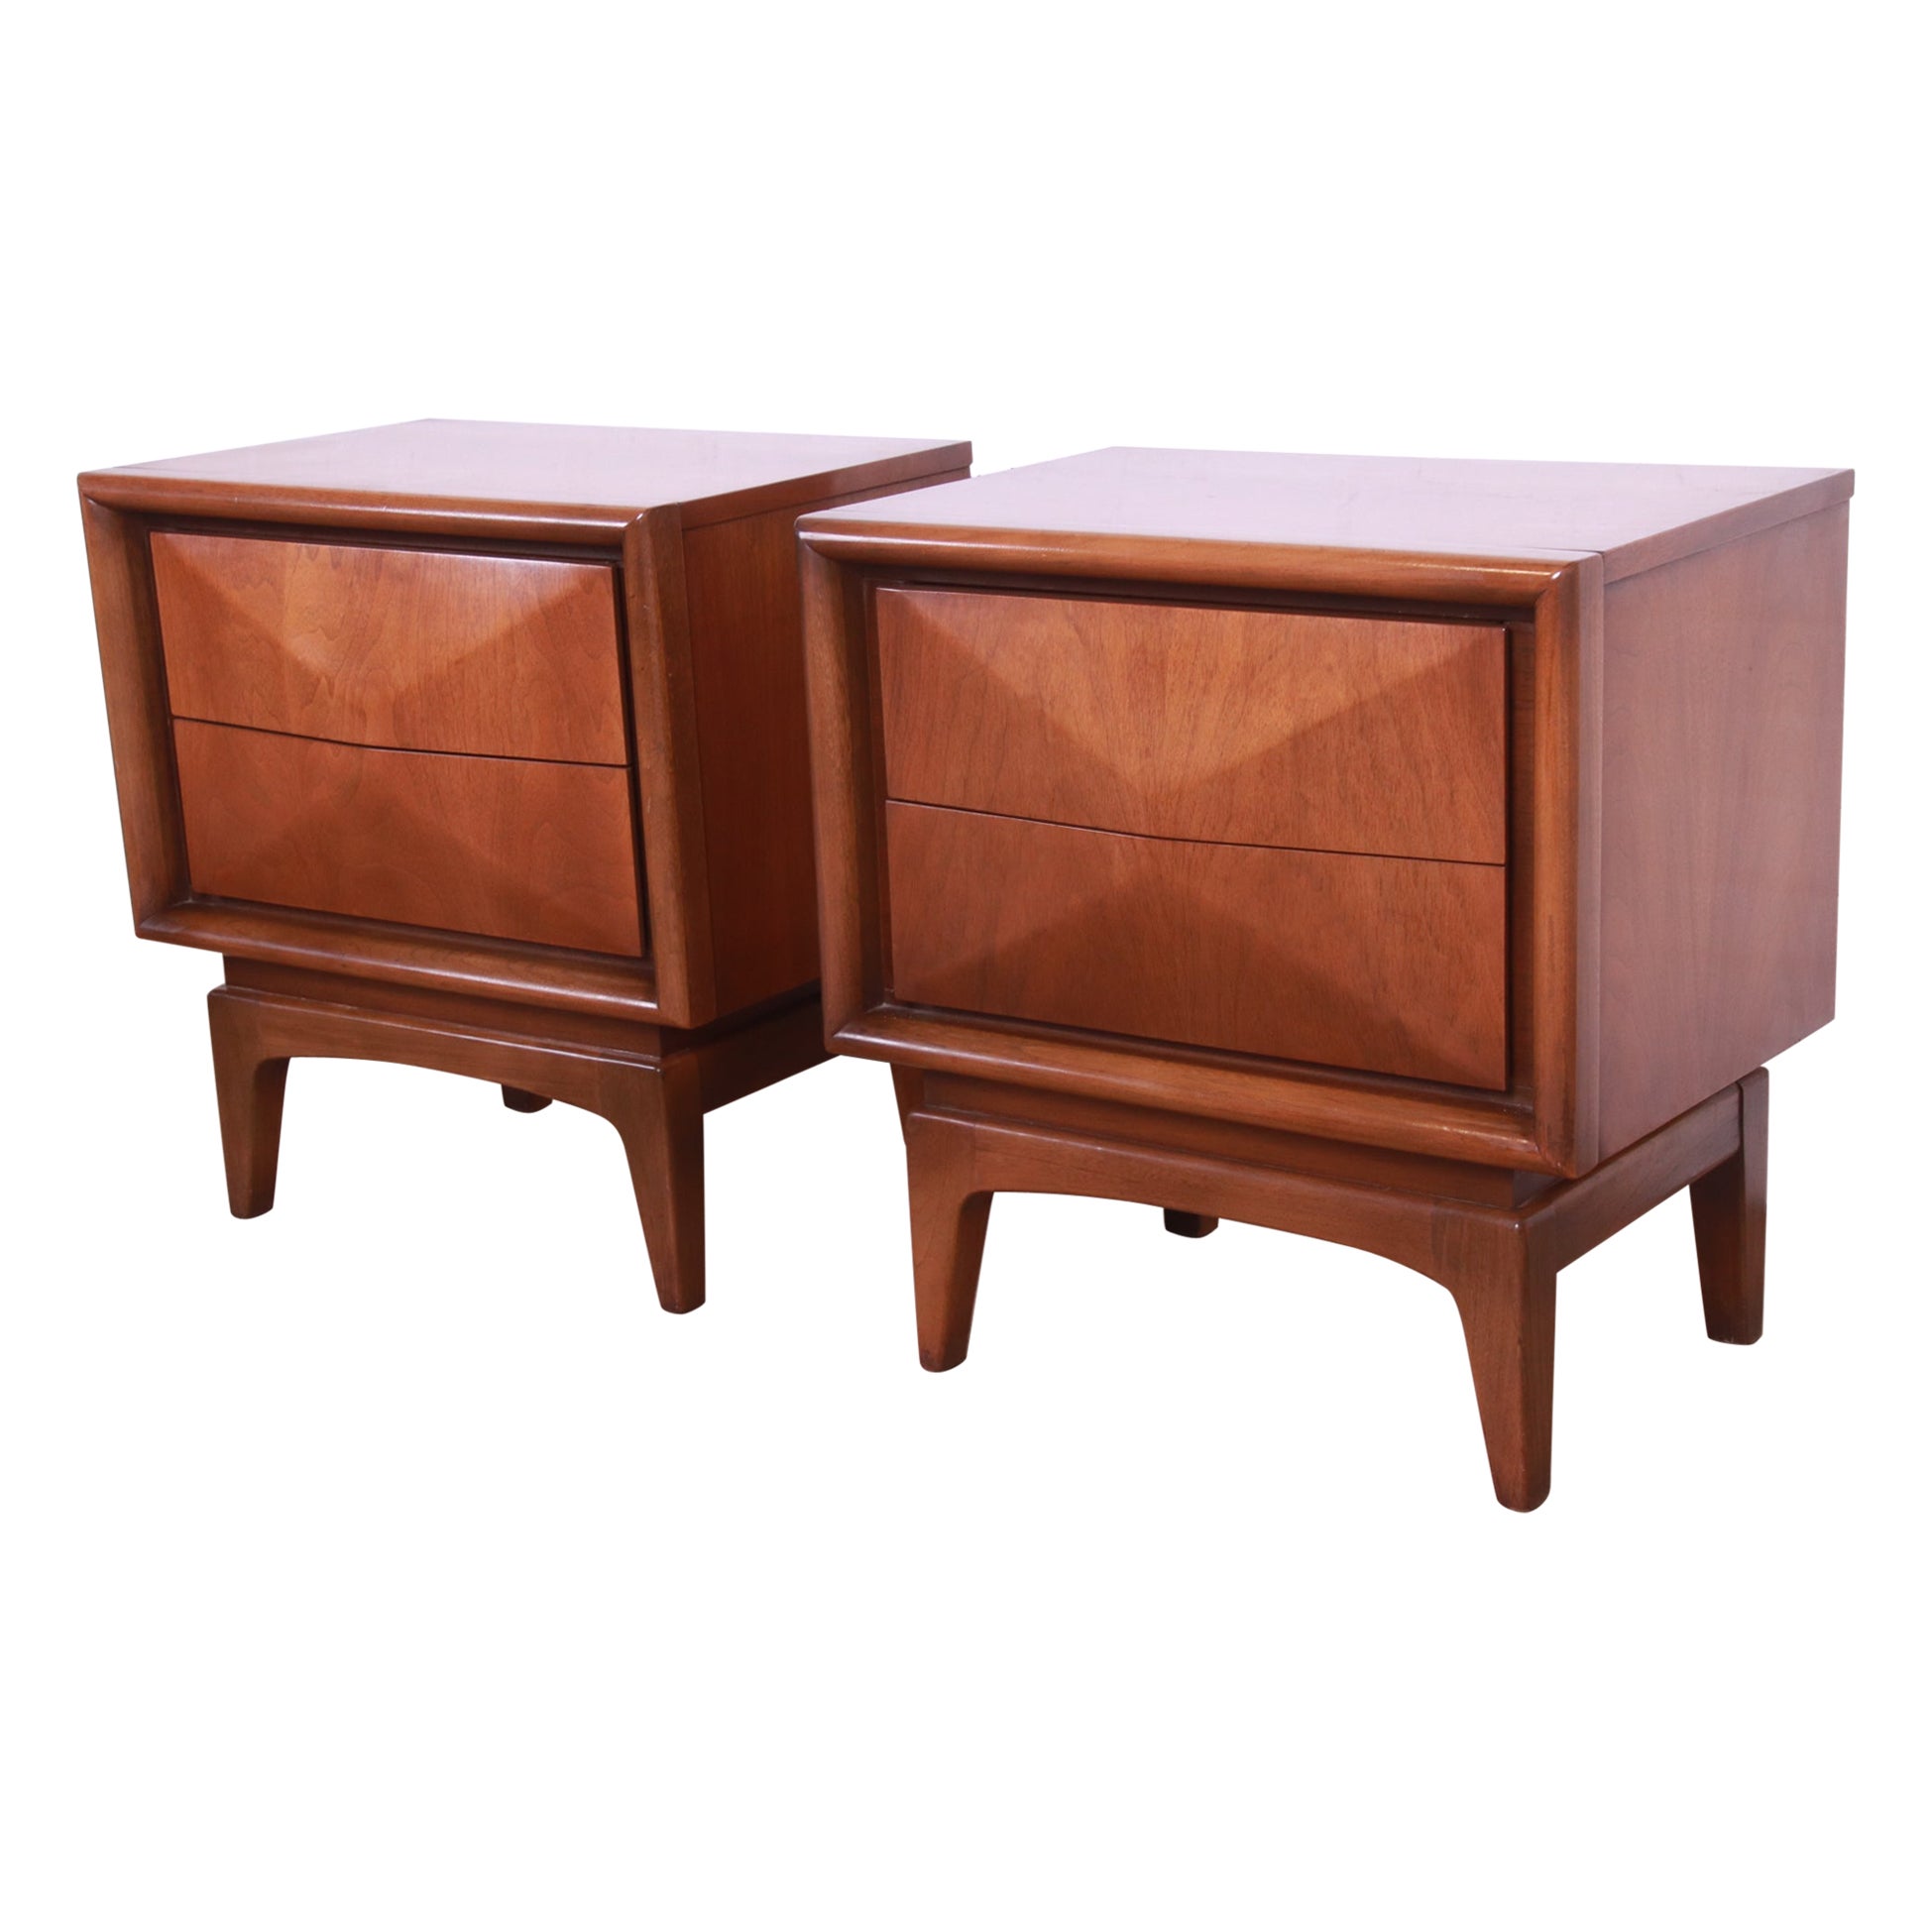 Mid-Century Modern Sculpted Walnut Diamond Front Nightstands by United, Pair